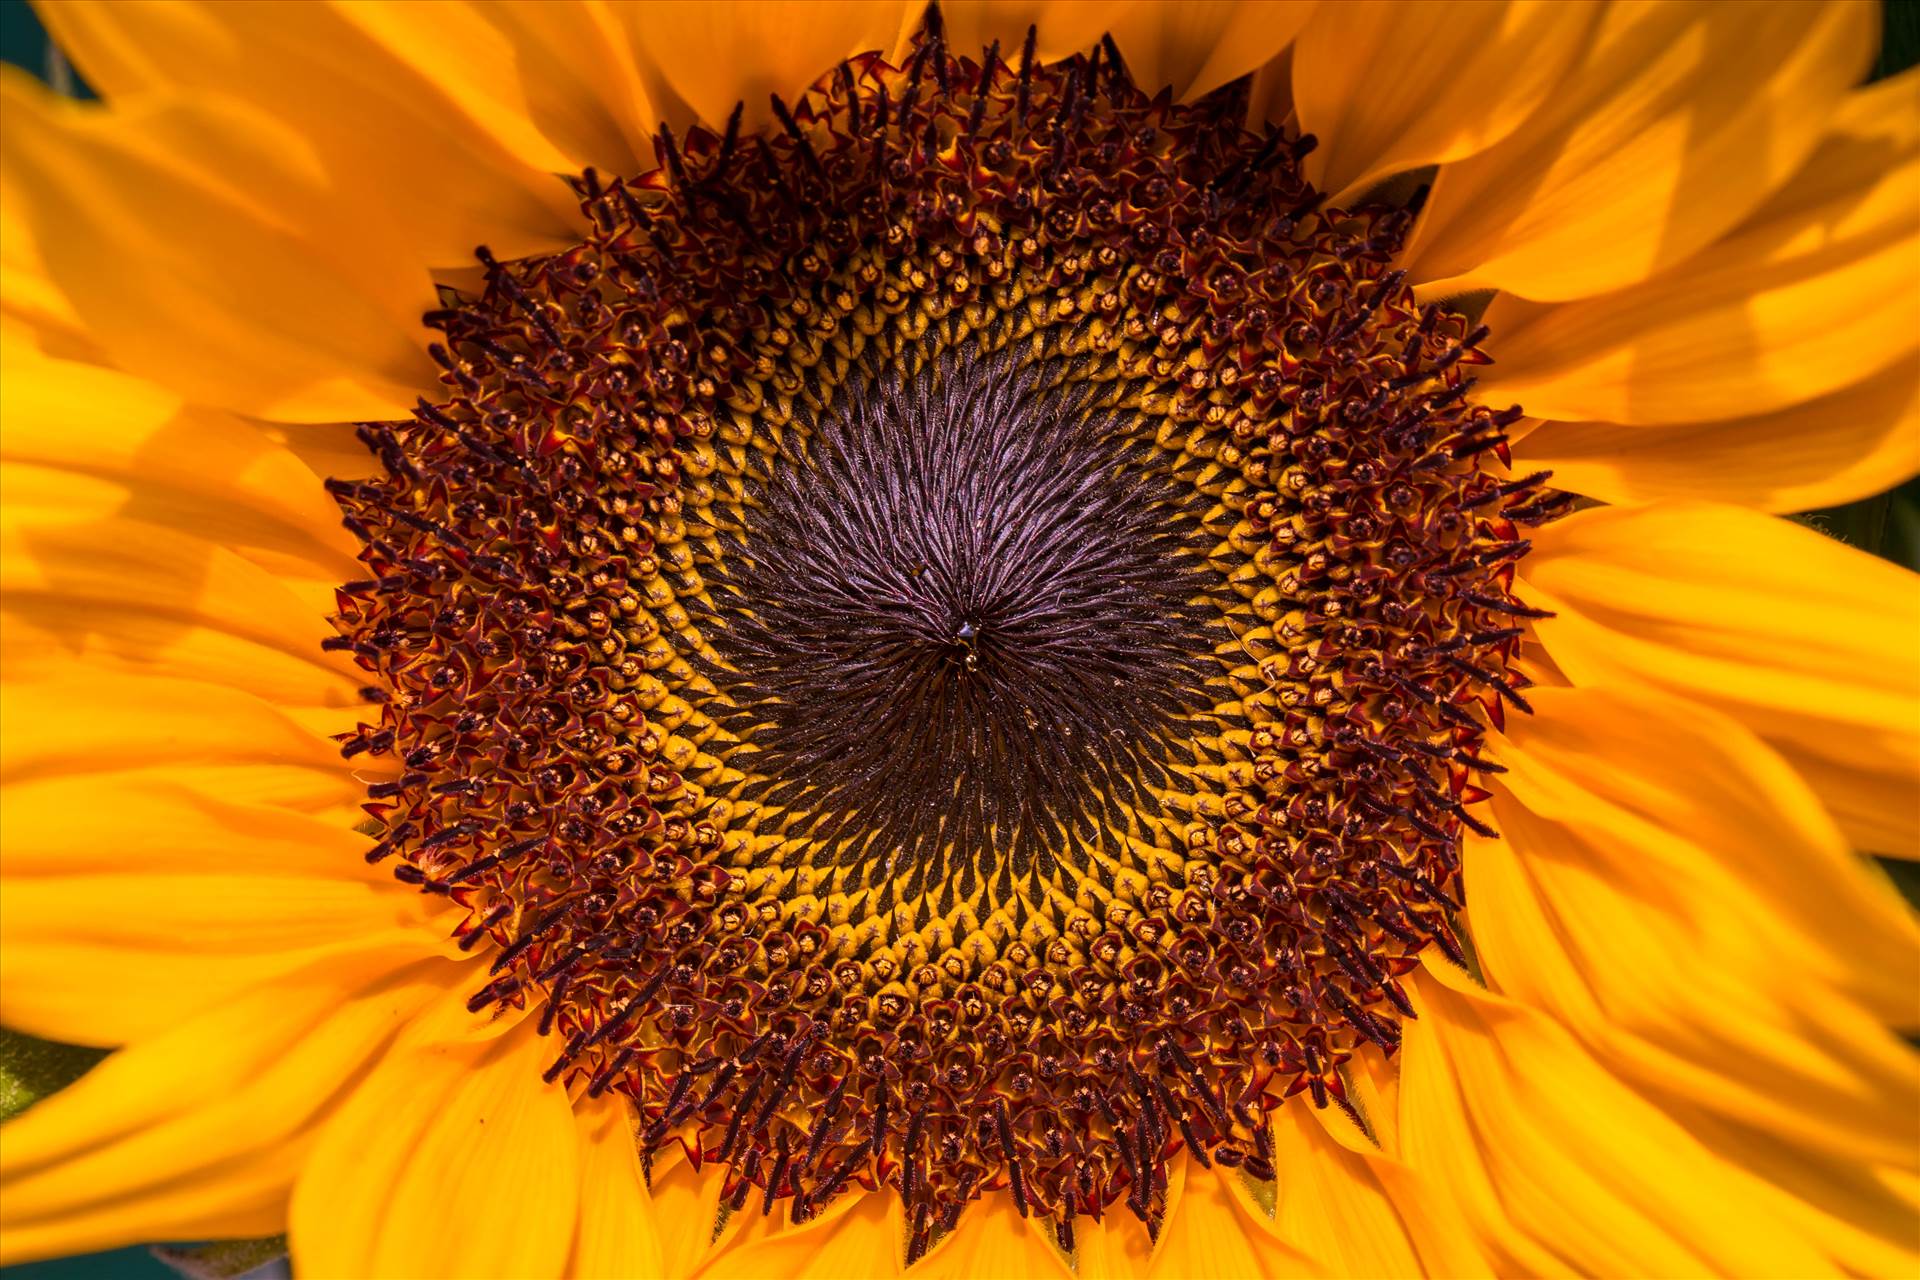 _MG_5626Sunflower.jpg undefined by WPC-187